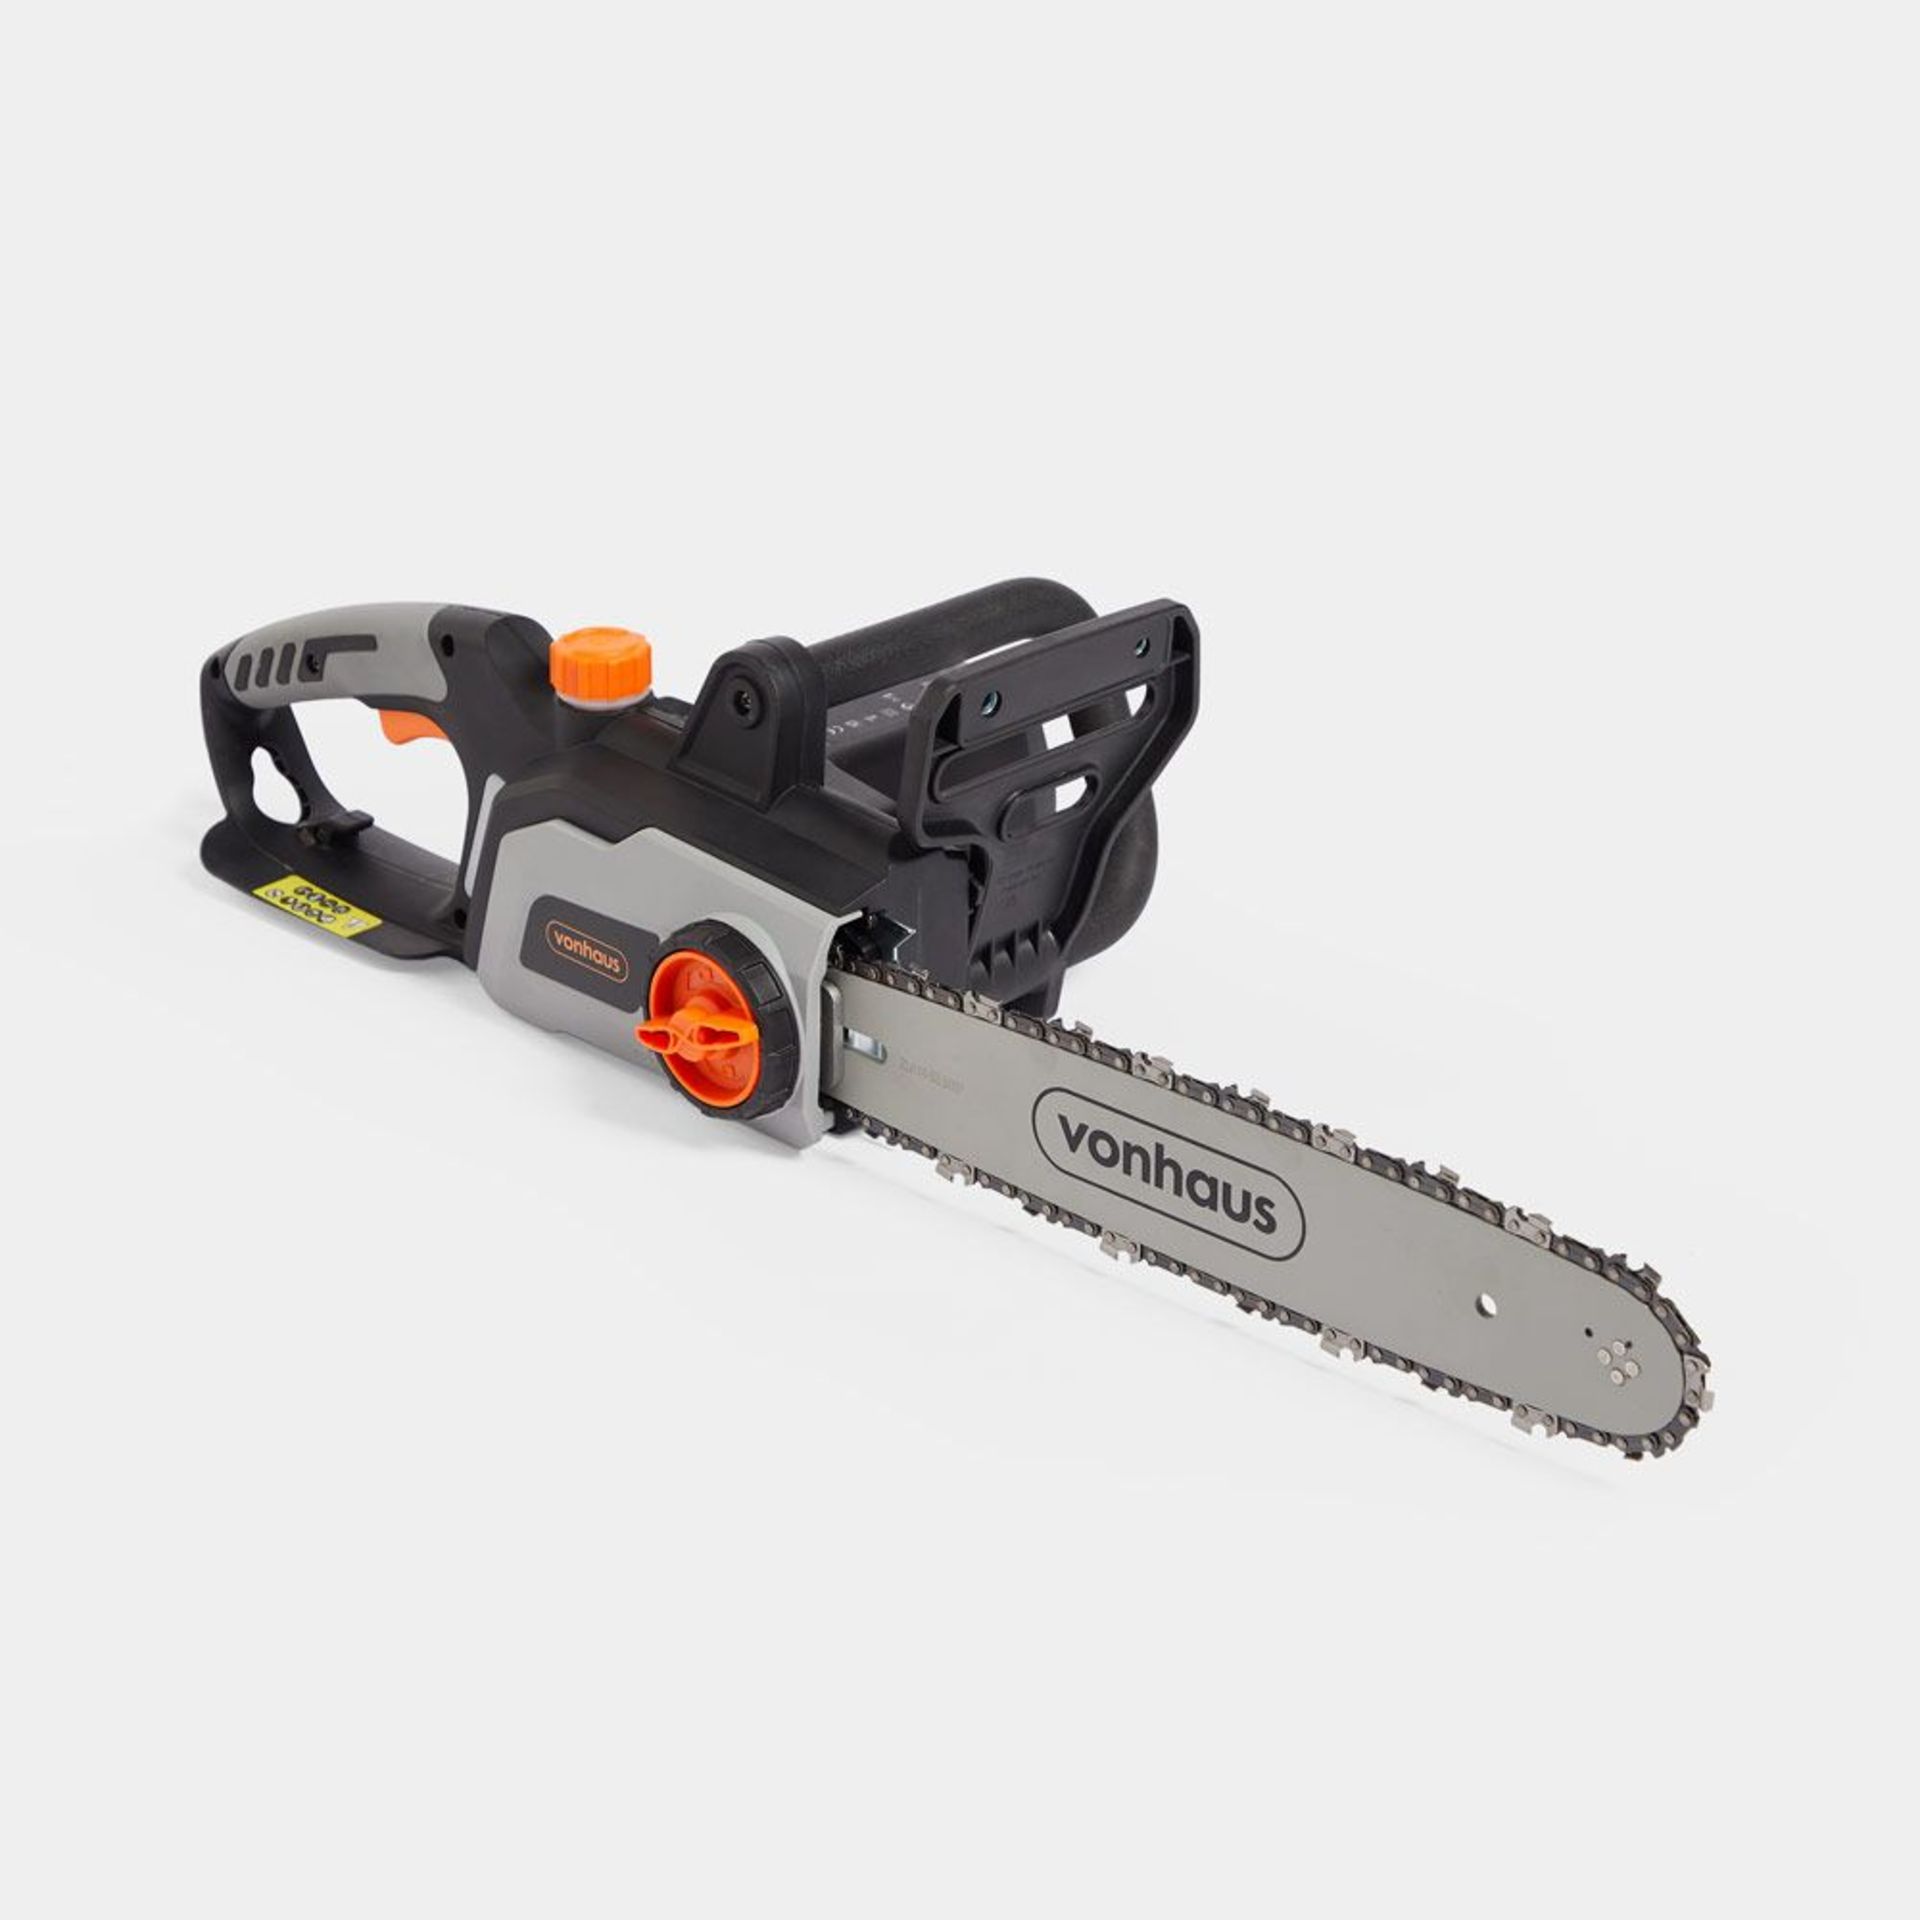 1600W Chainsaw. - R8. Make light work of any wood using our powerful 14” 1600W Chainsaw, and